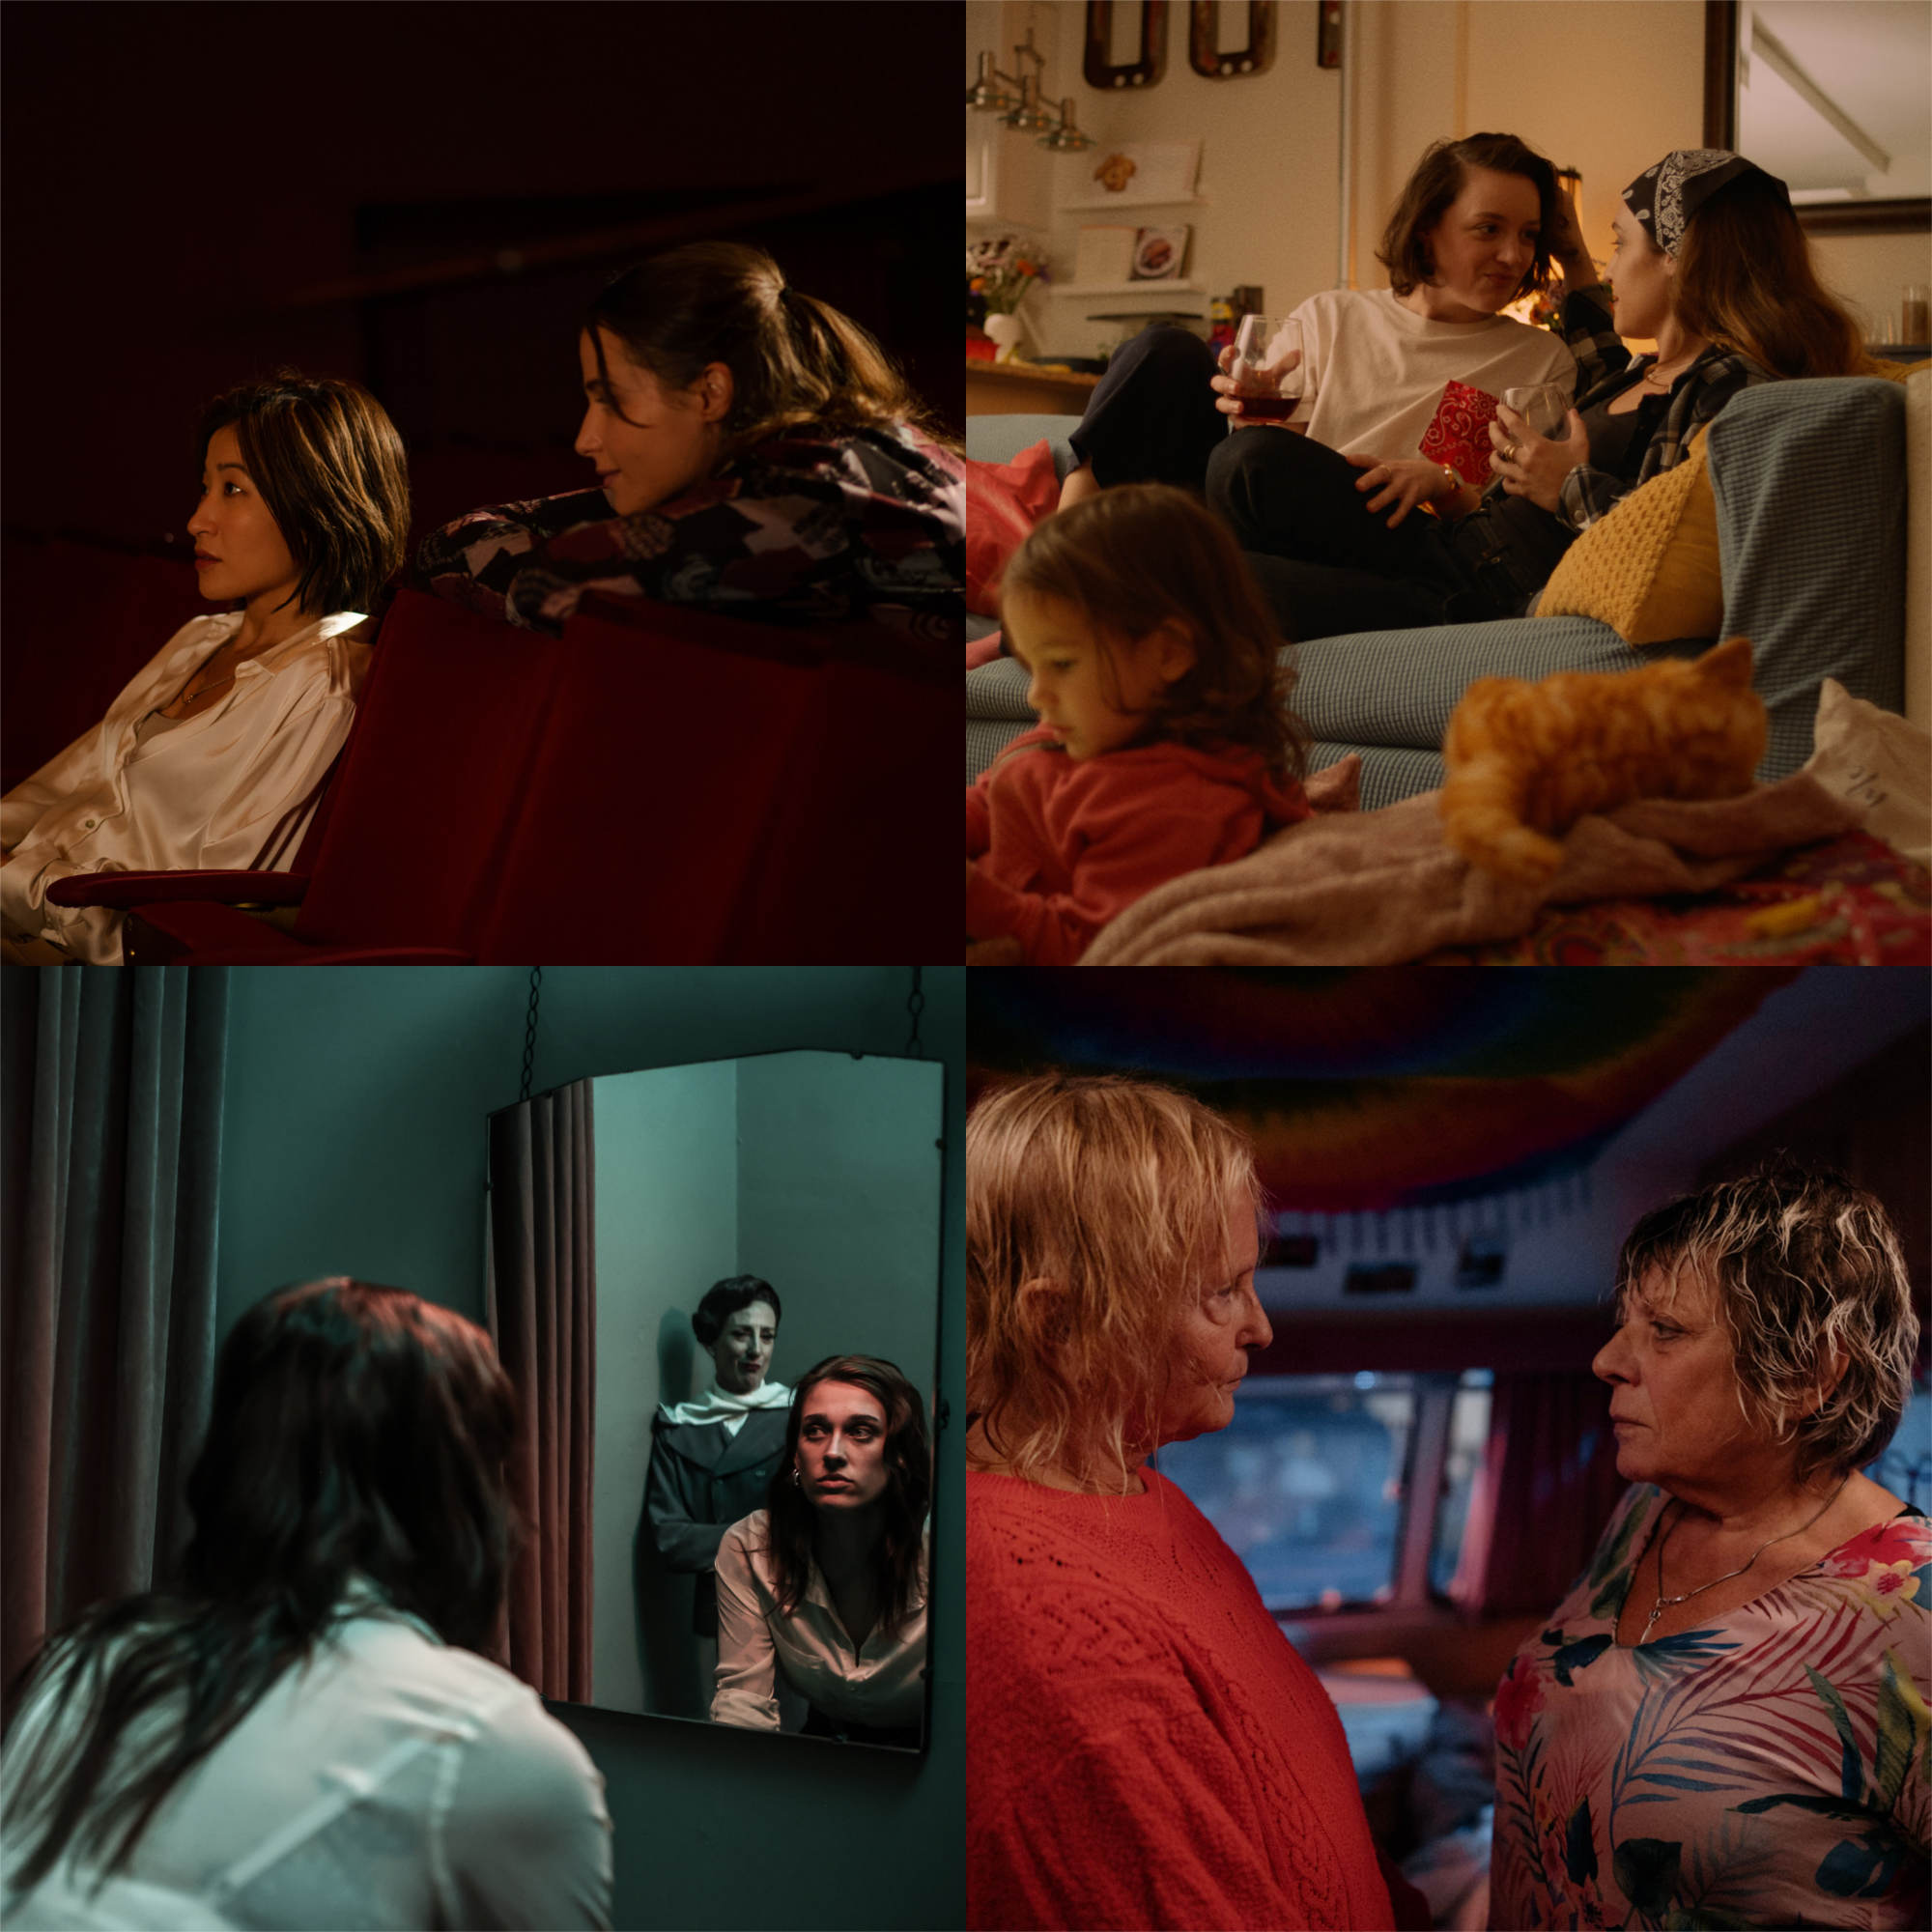 A collage of images: two women sitting in a cinema, a couple sharing a drink on a couch, a woman looking into a mirror with a ghostly figure over her shoulder, and two older women with het hair looking into each other's eyes lovingly.